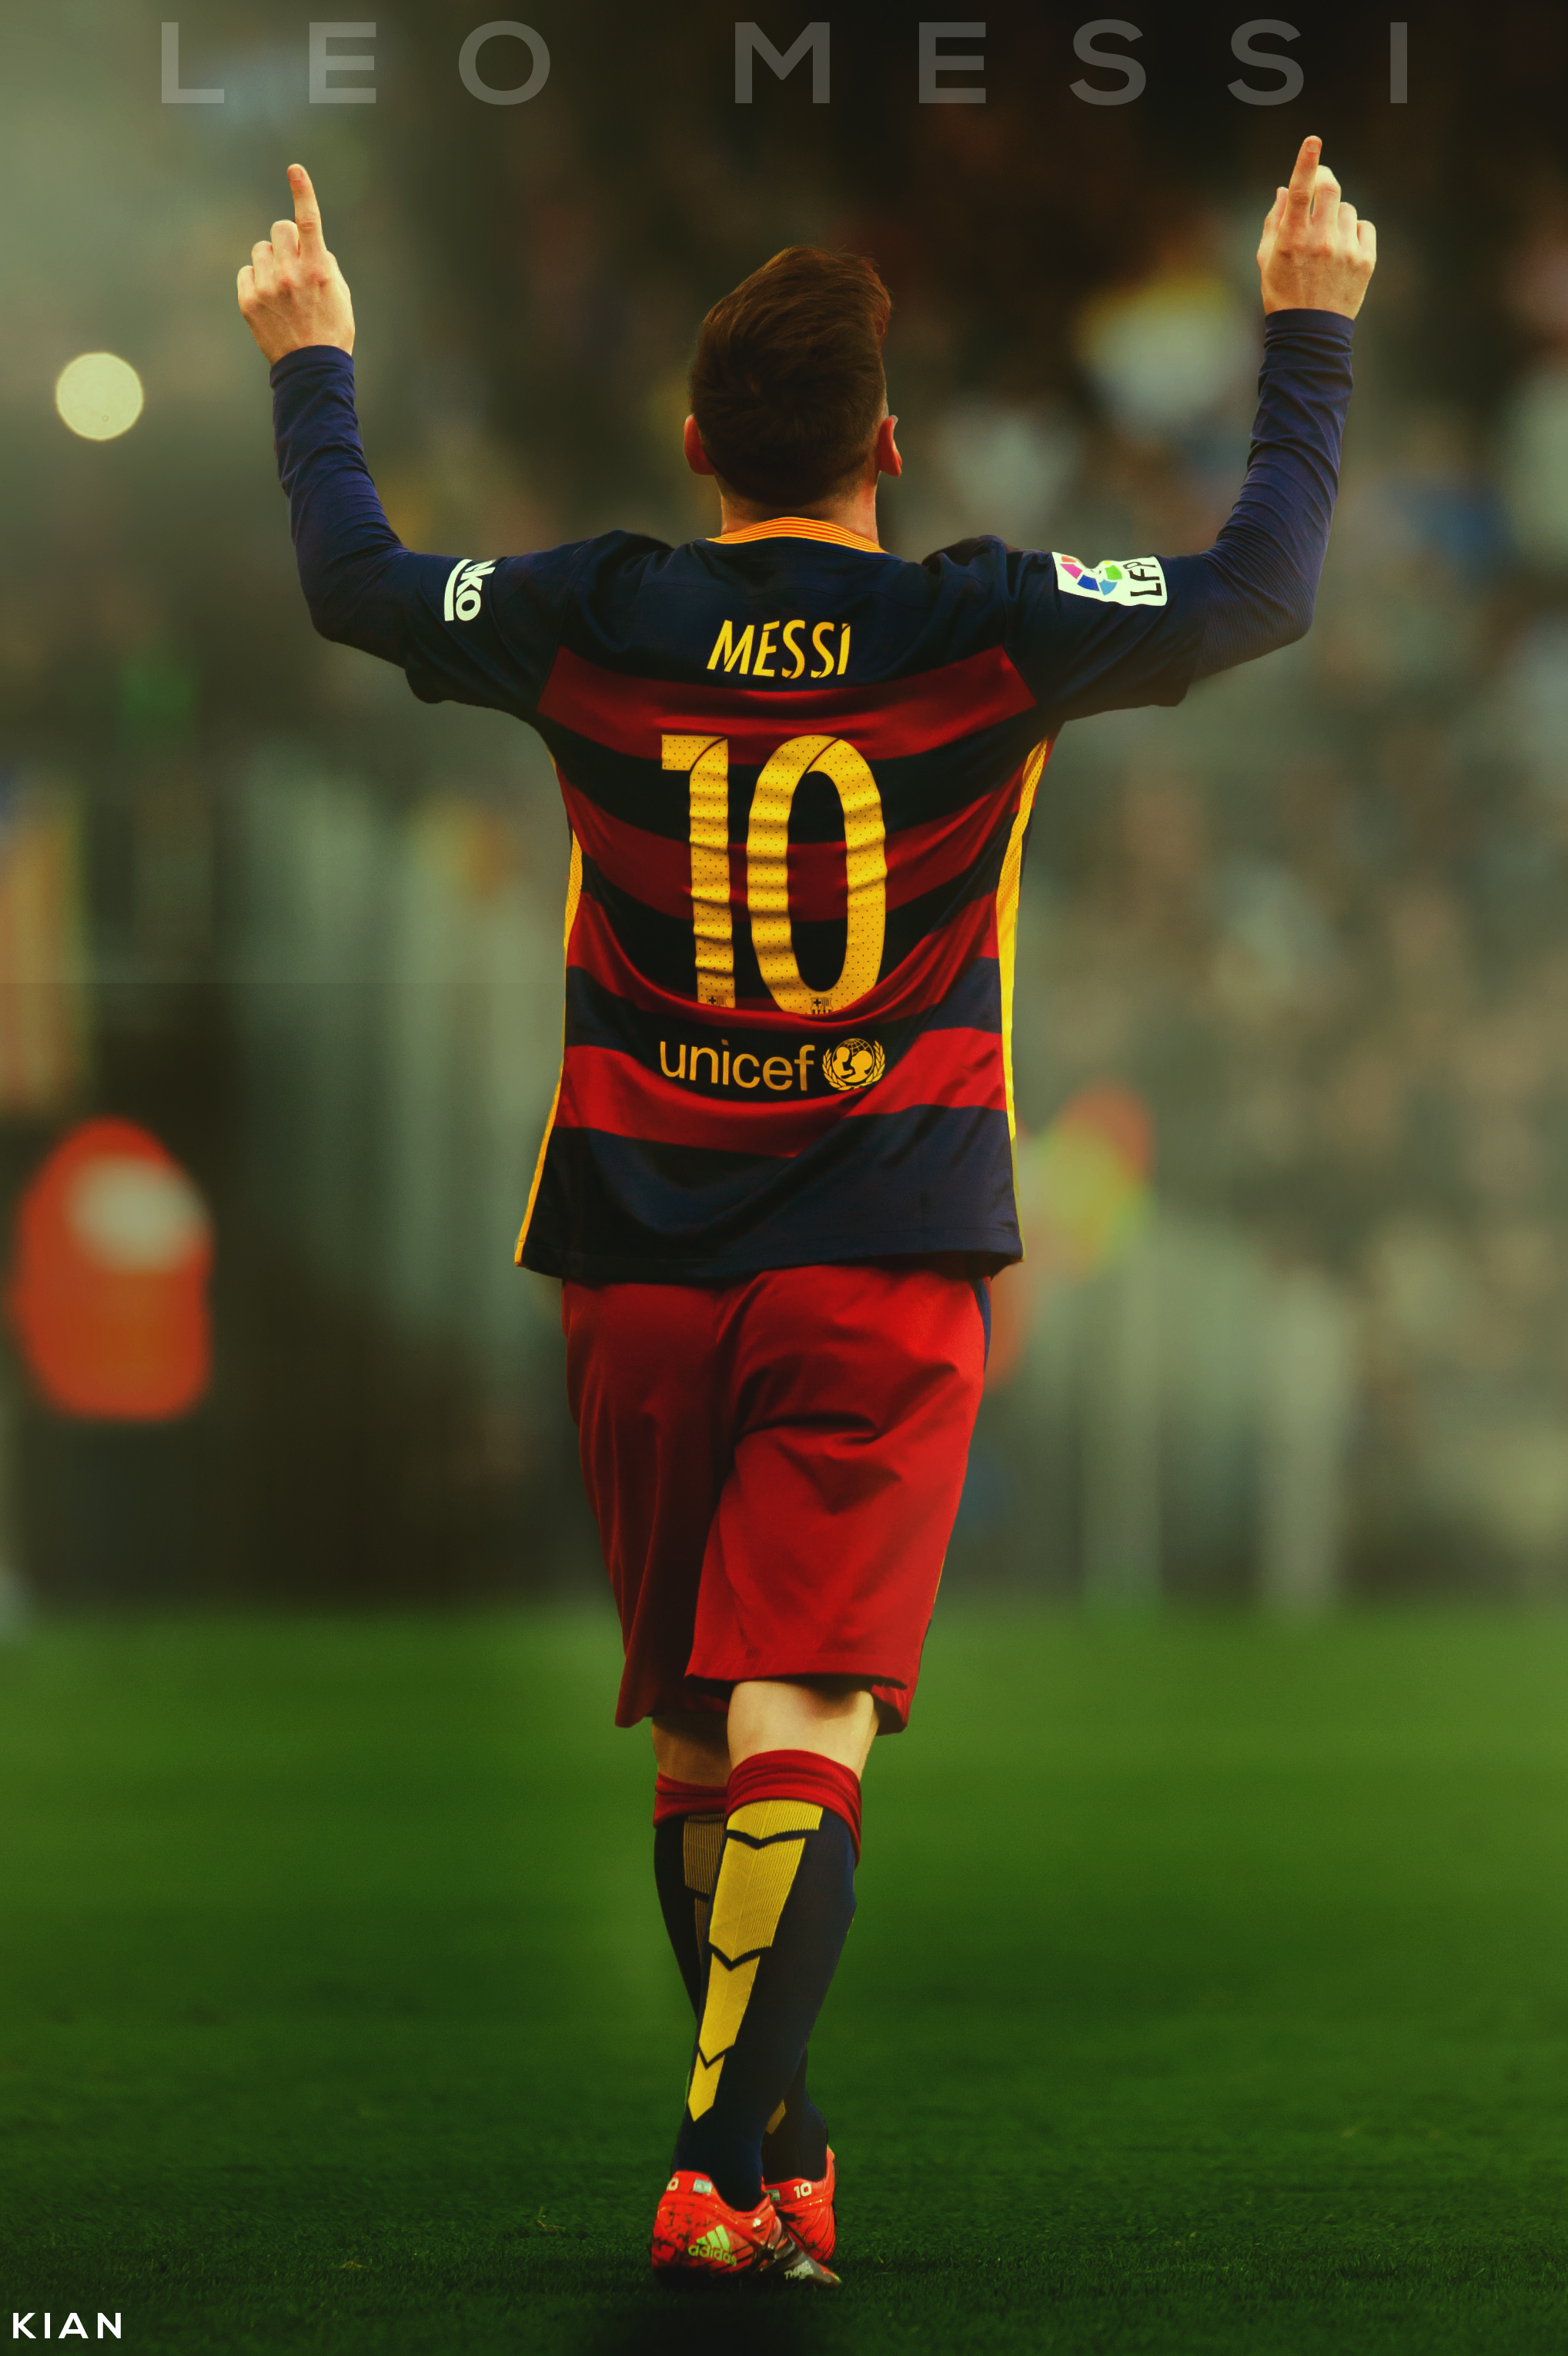 People 2037x3060 Lionel Messi soccer photoshopped effects FC Barcelona